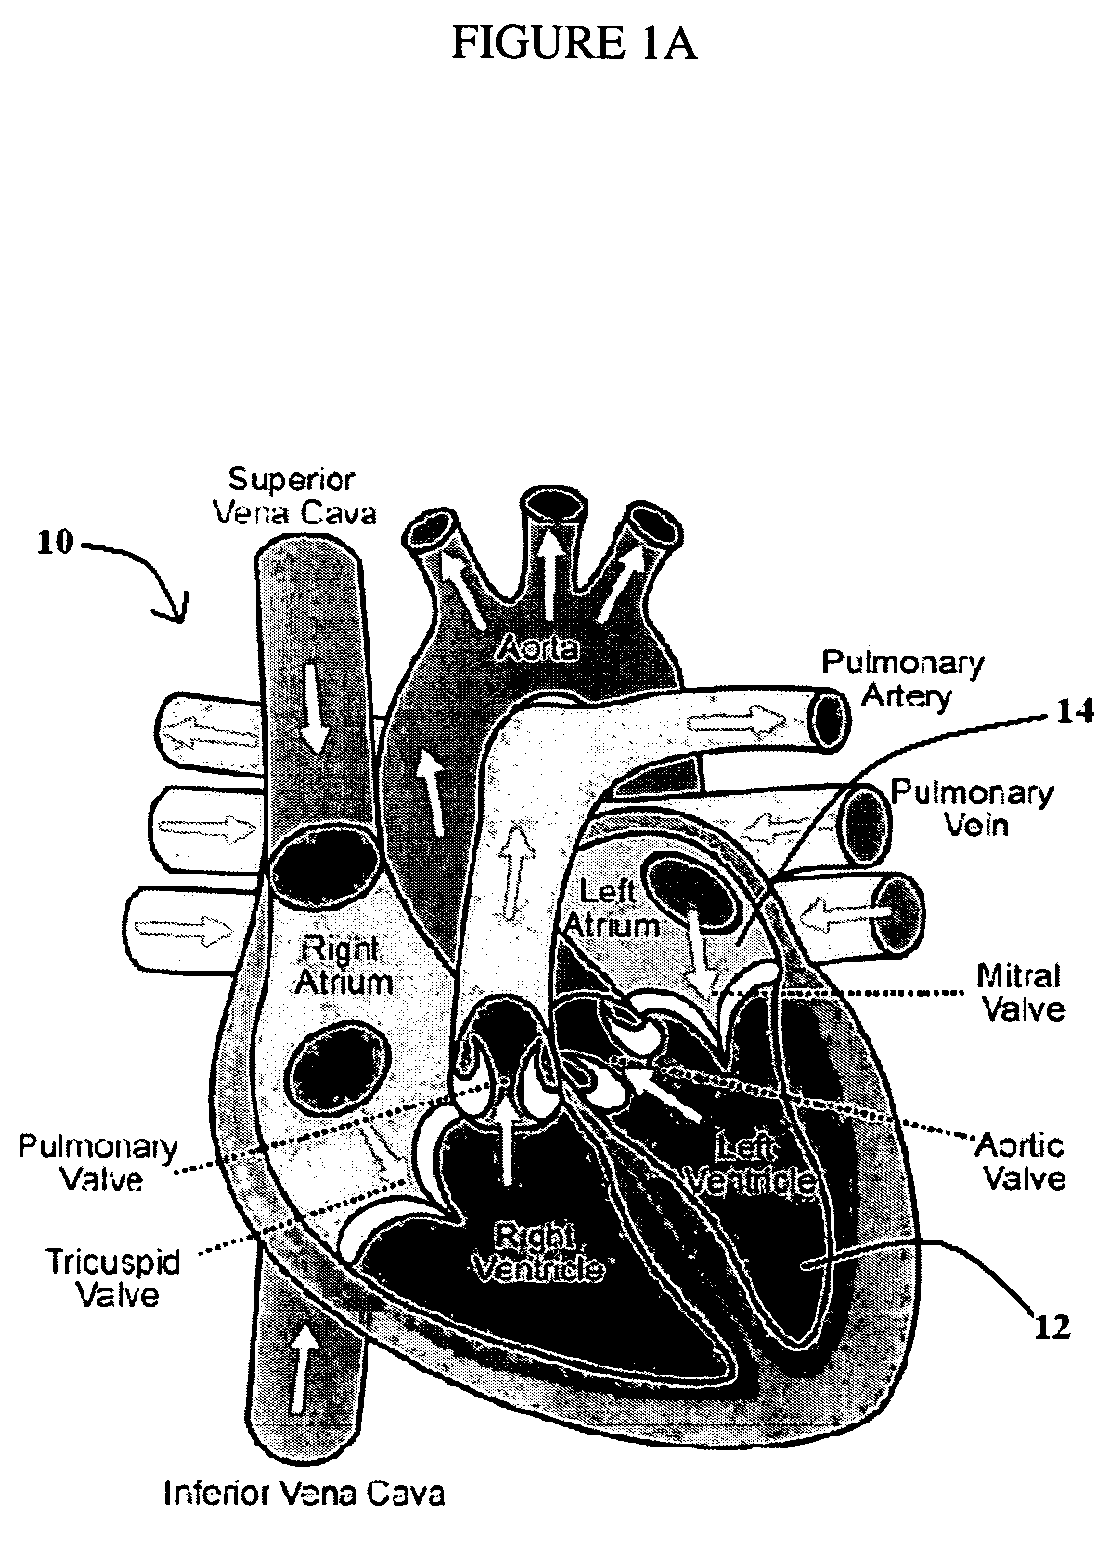 System and method for intraventricular treatment